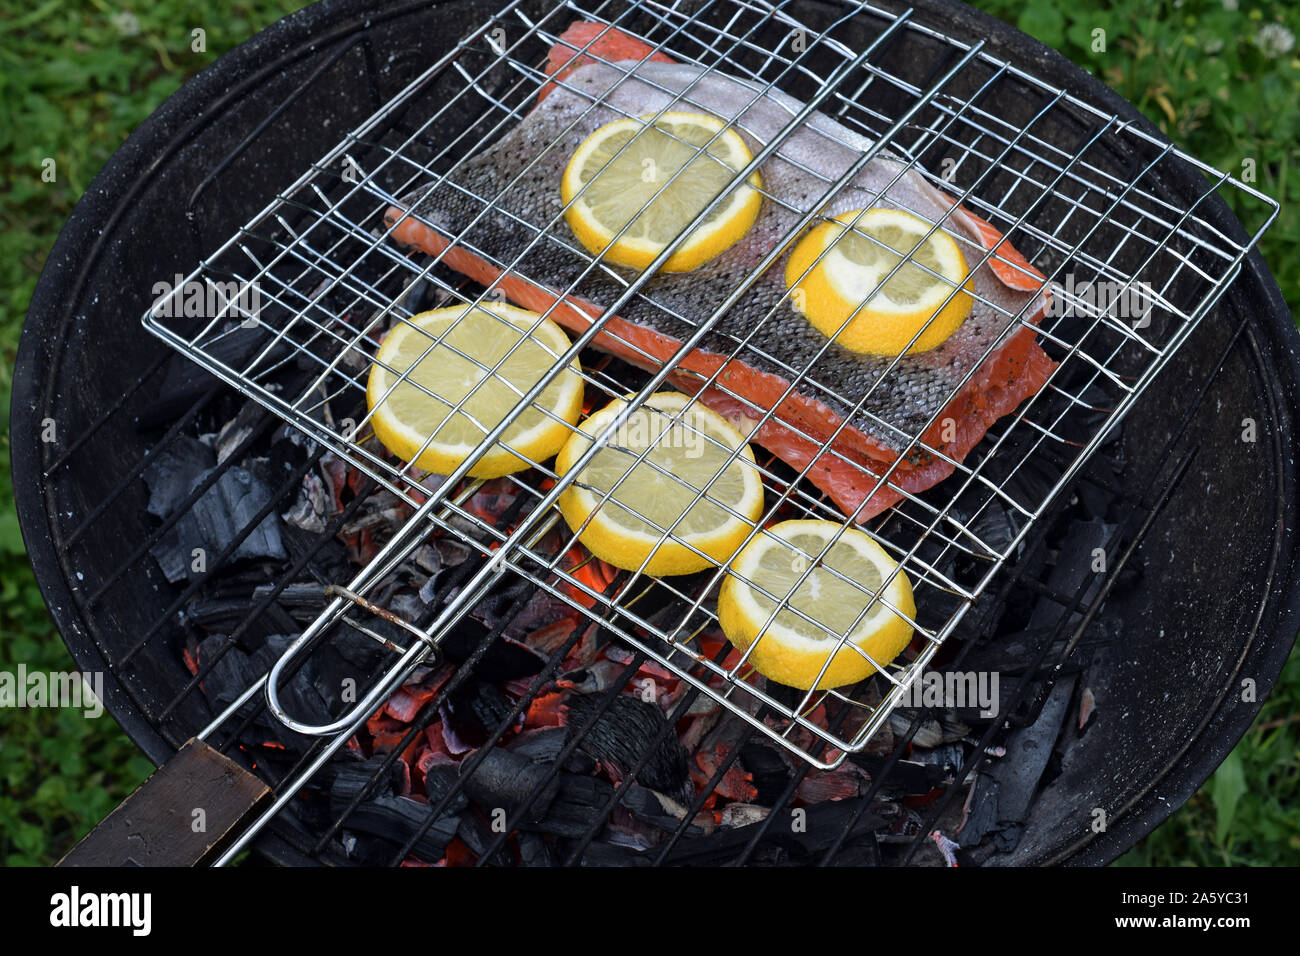 Grilling salmon with lemon slices on round charcoal grill with gridiron. Hot glowing embers under fish. Stock Photo